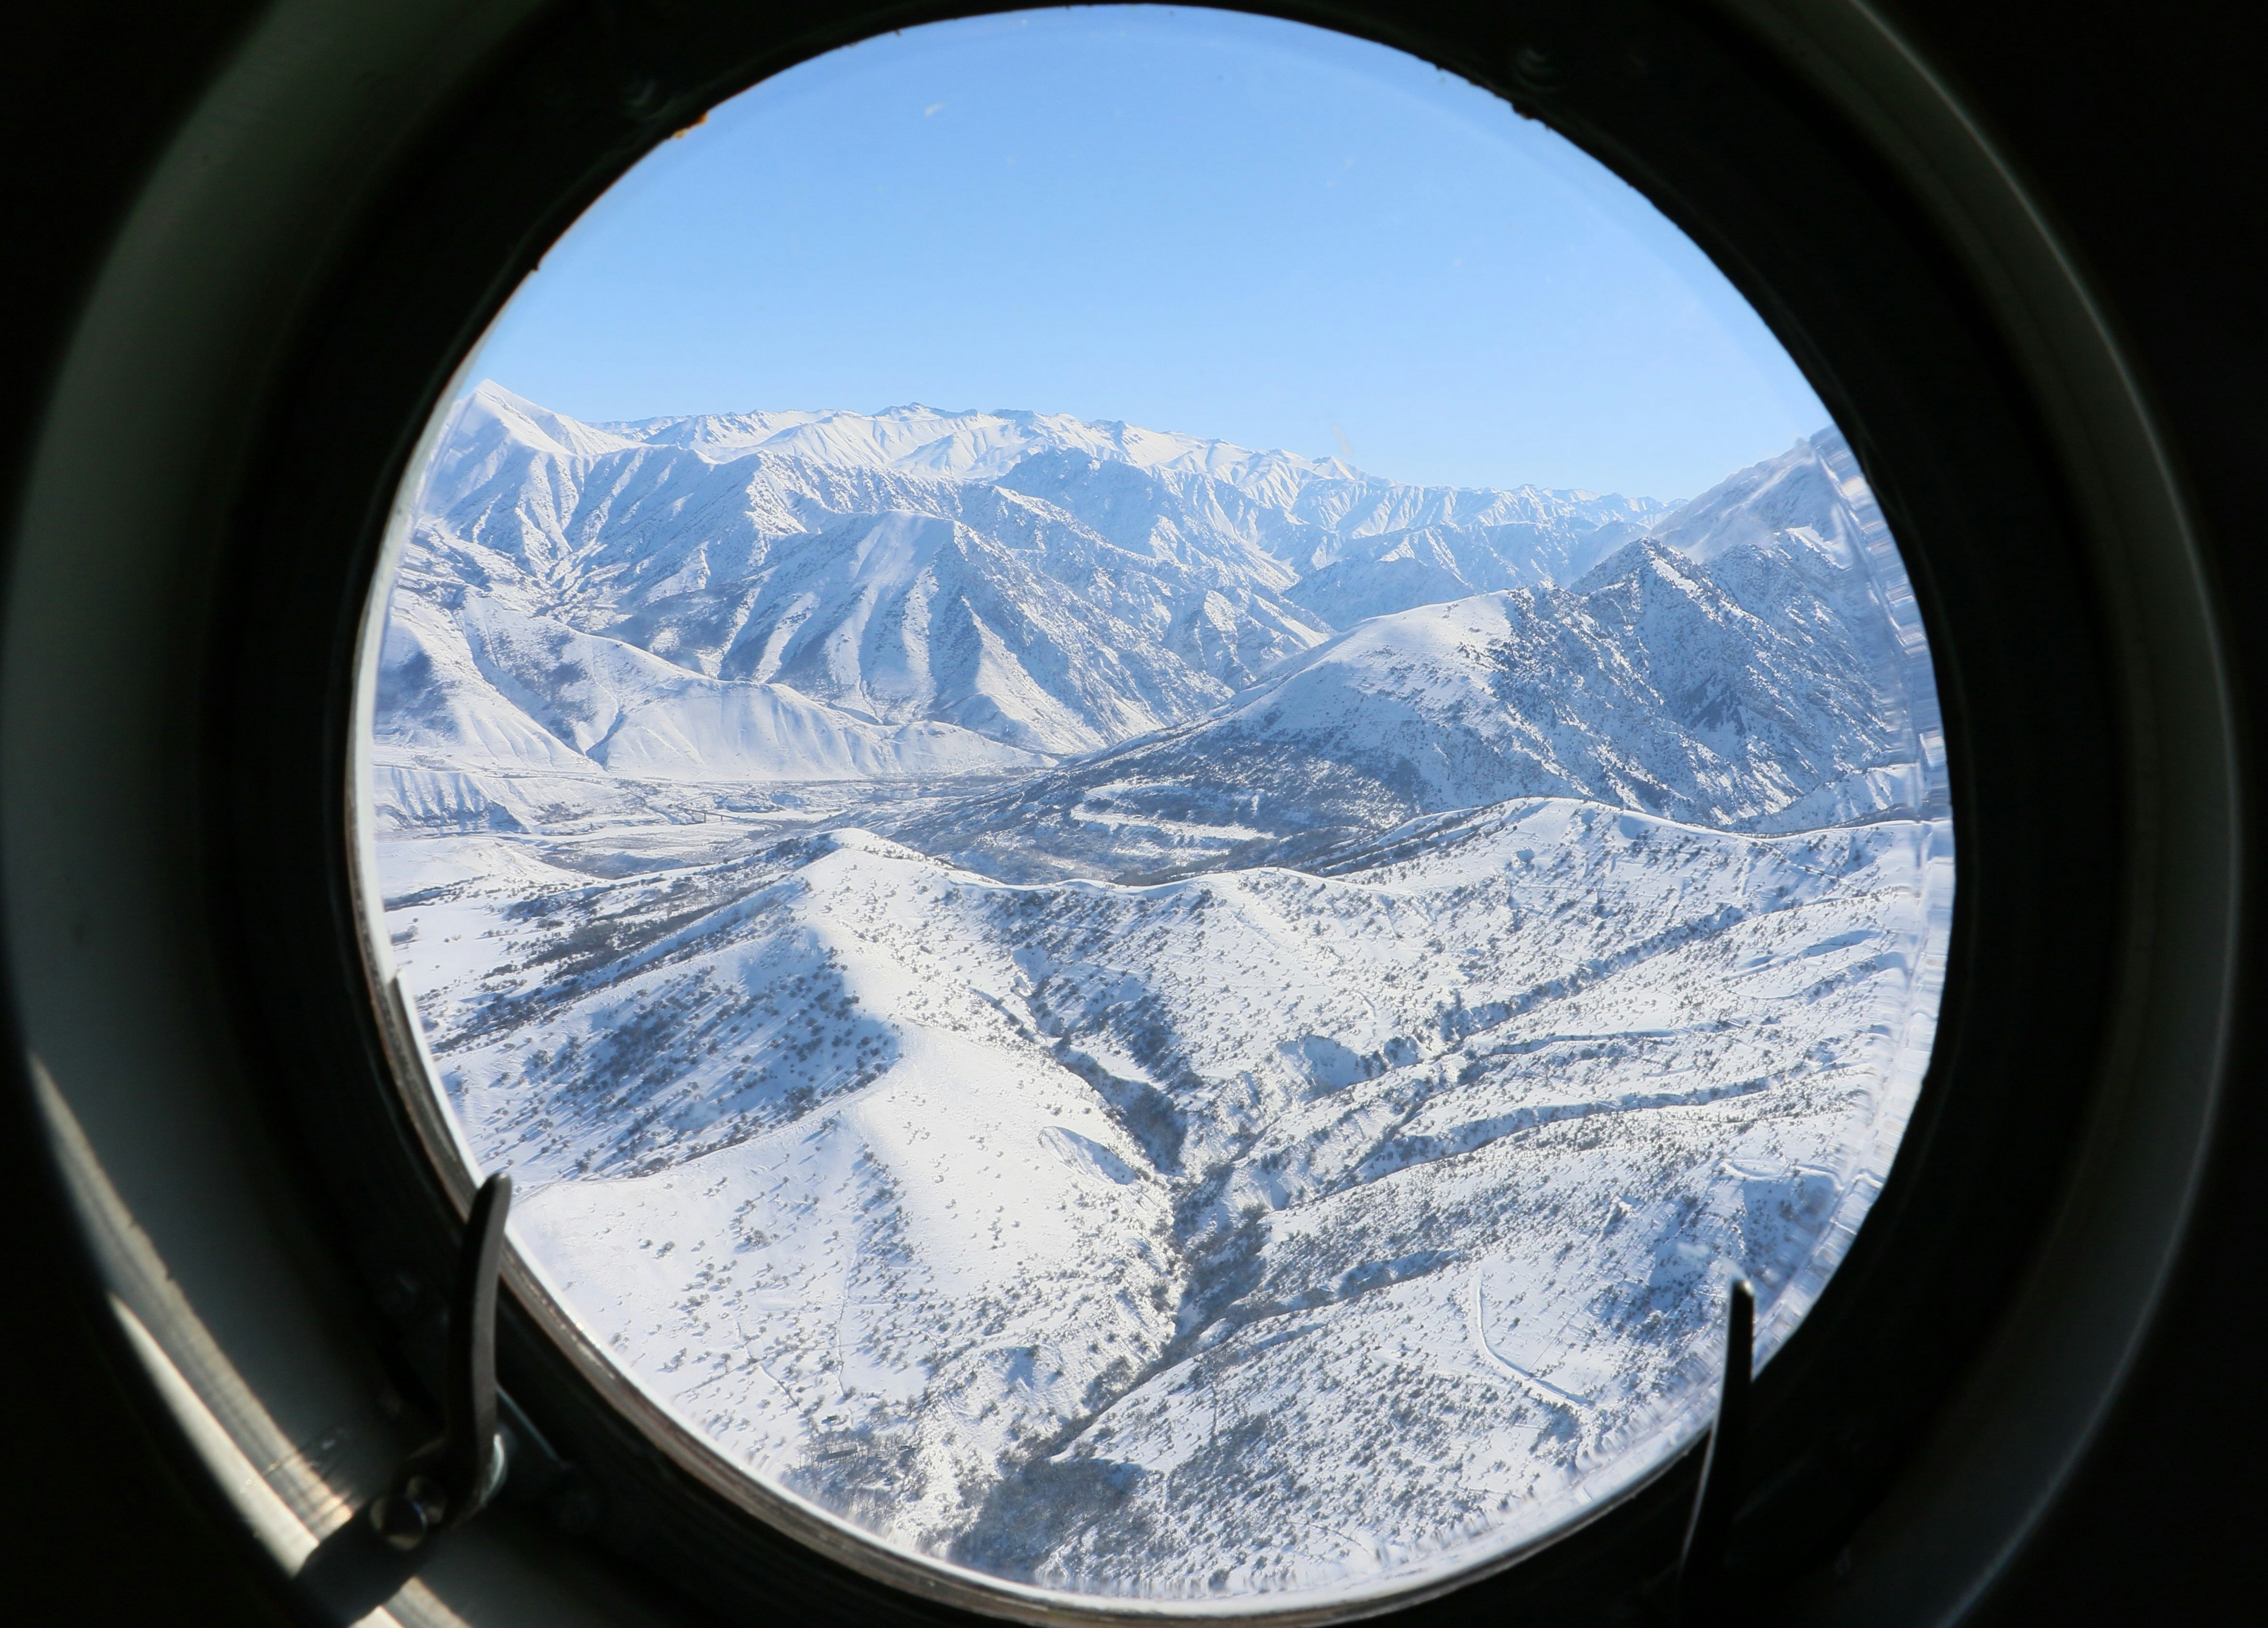 A view of beautiful white mountains through the circular window of a helicopter.